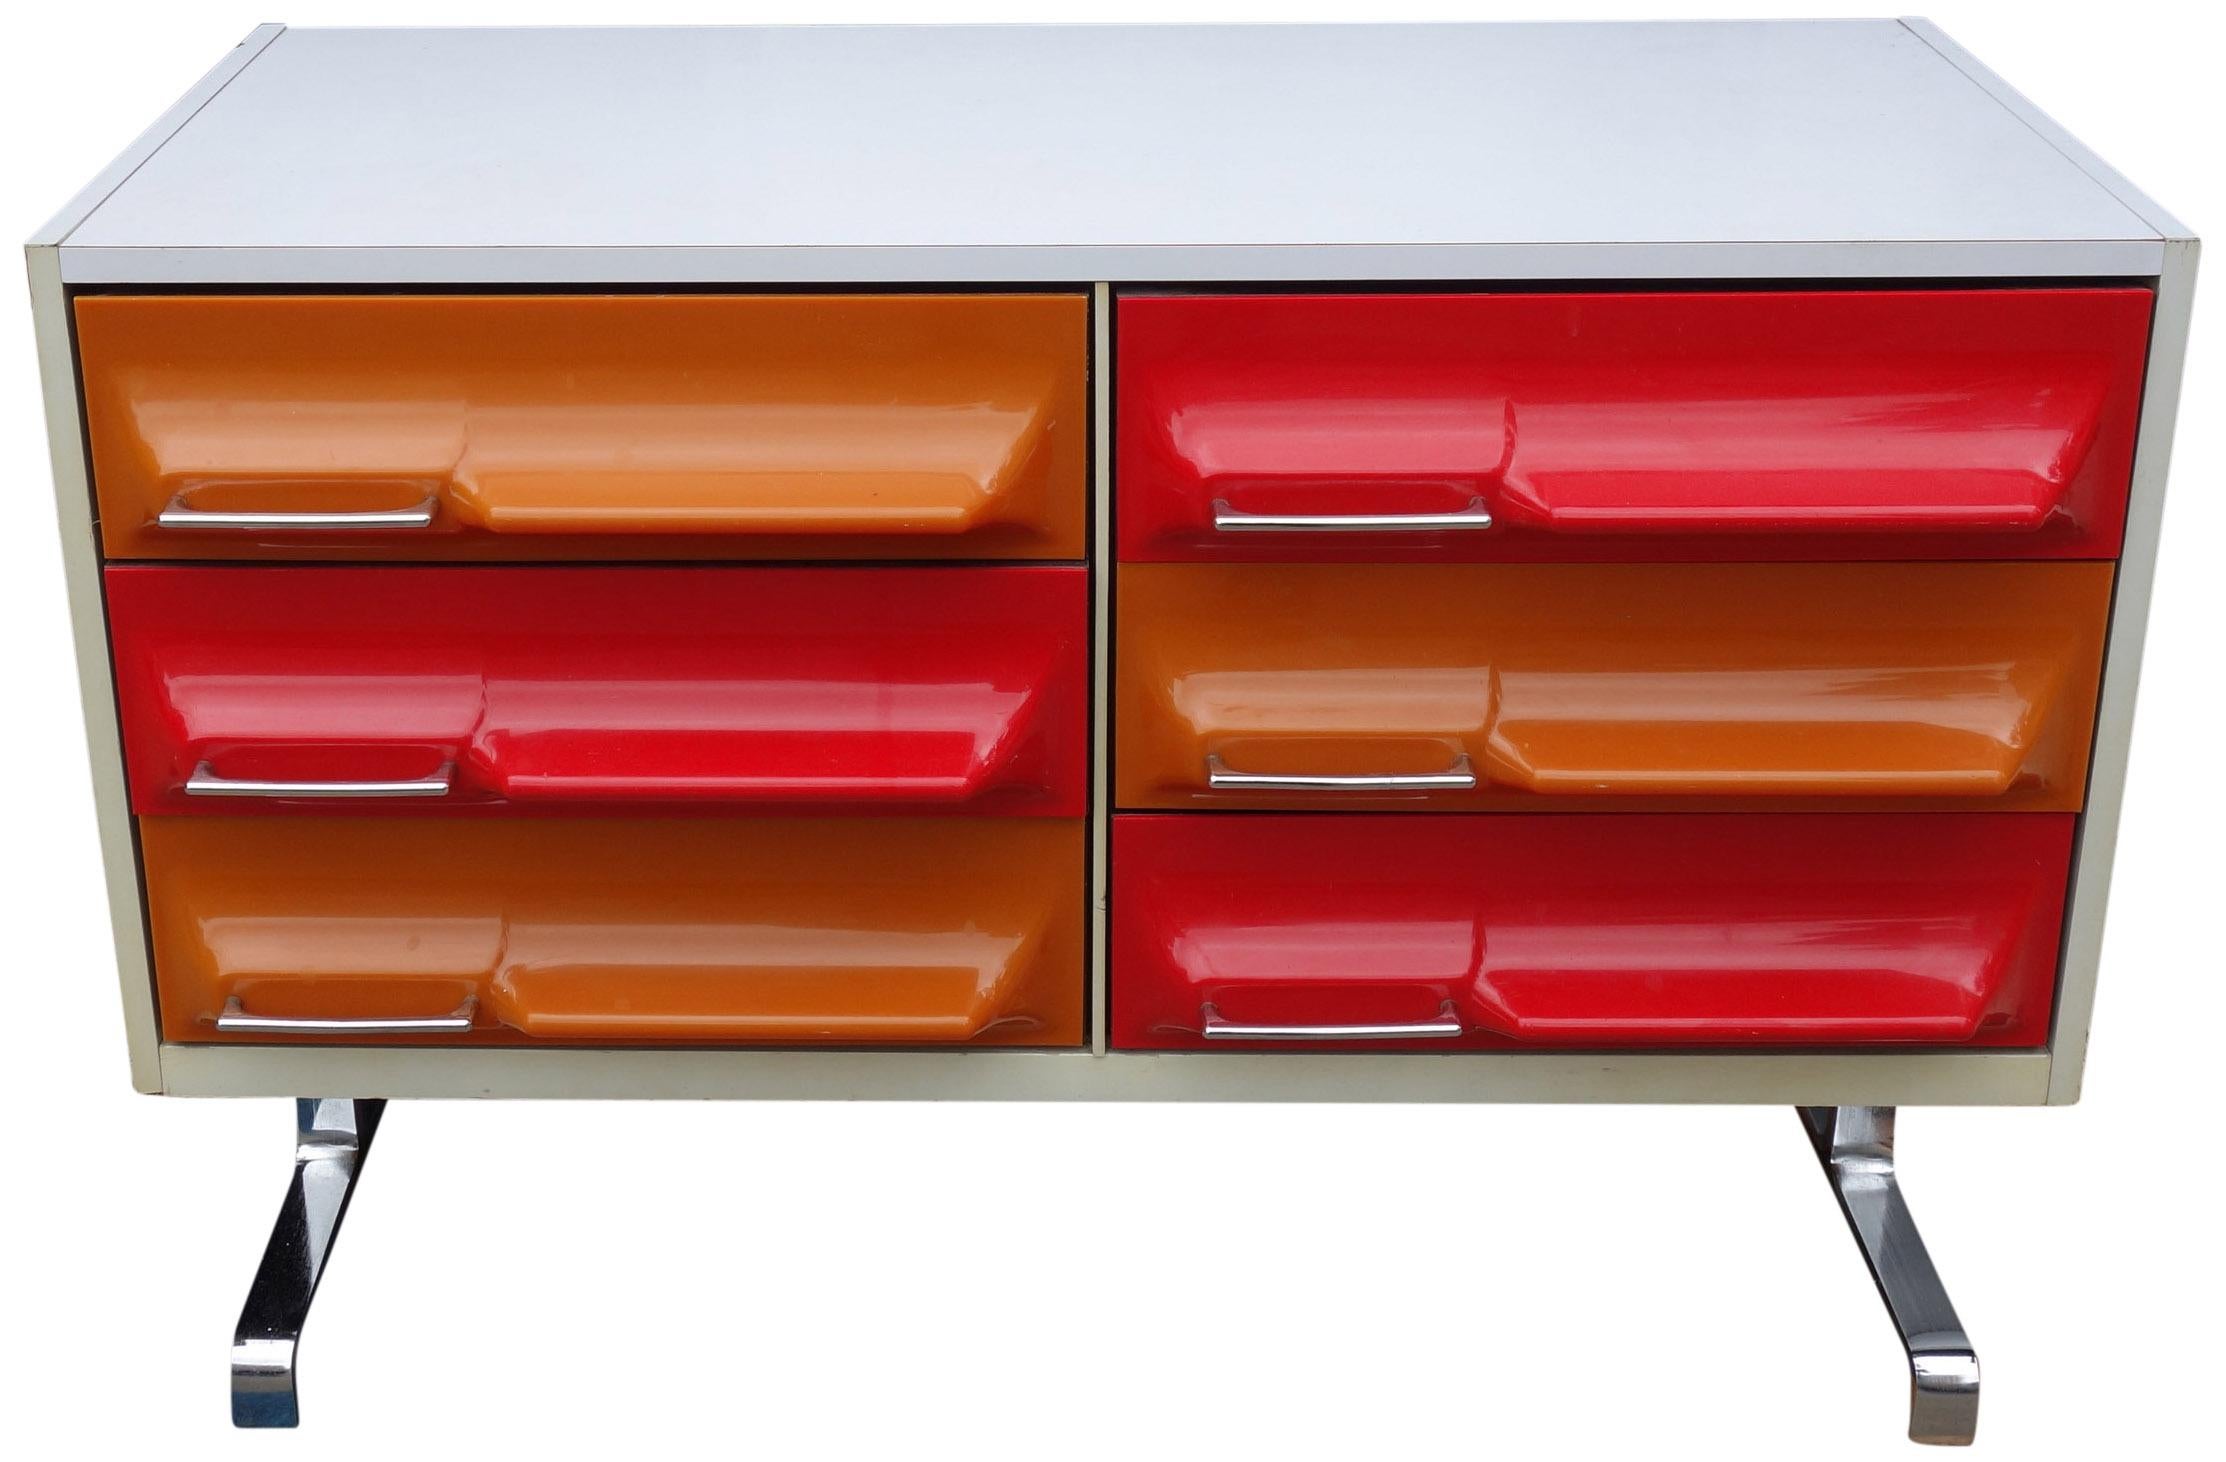 Similar to Rayond Loewy DF200 pieces and produced around the same time. These fantastic space-age dressers are a wonderful way to brighten up your space. Wonderfully crafted featuring ABS plastic fronts on chrome legs. Total depth including fronts